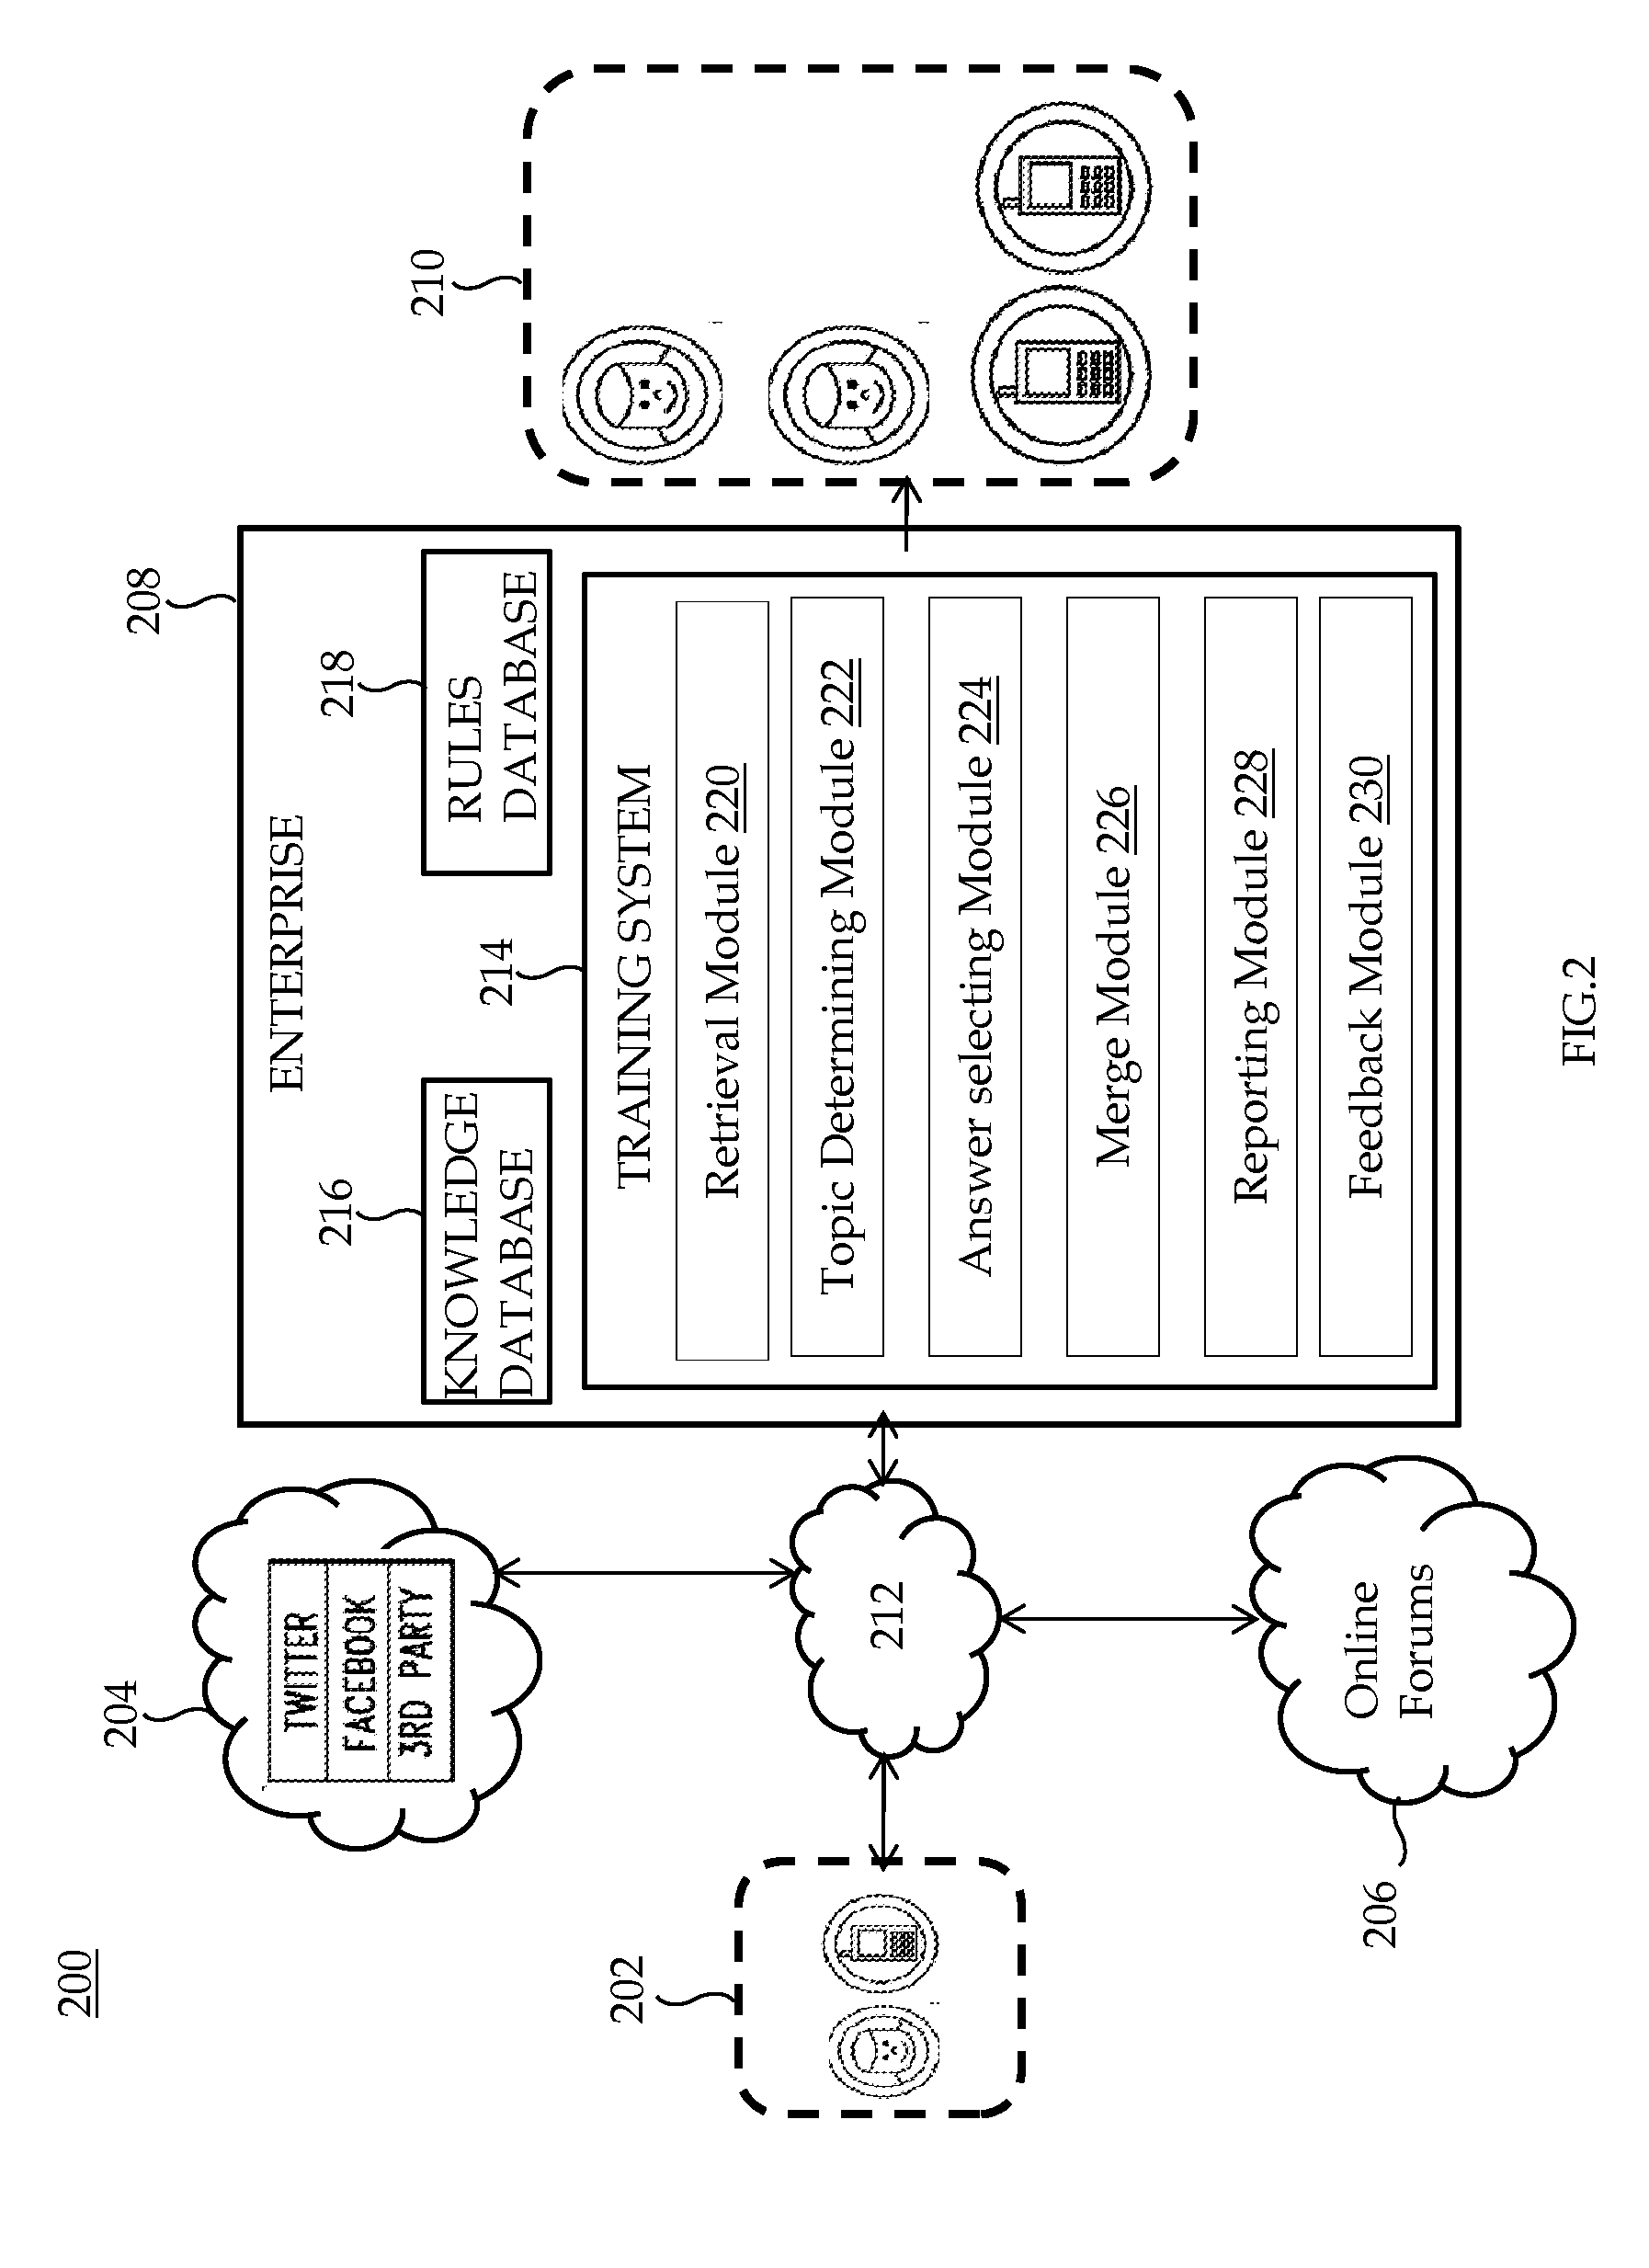 System and method for training agents of a contact center